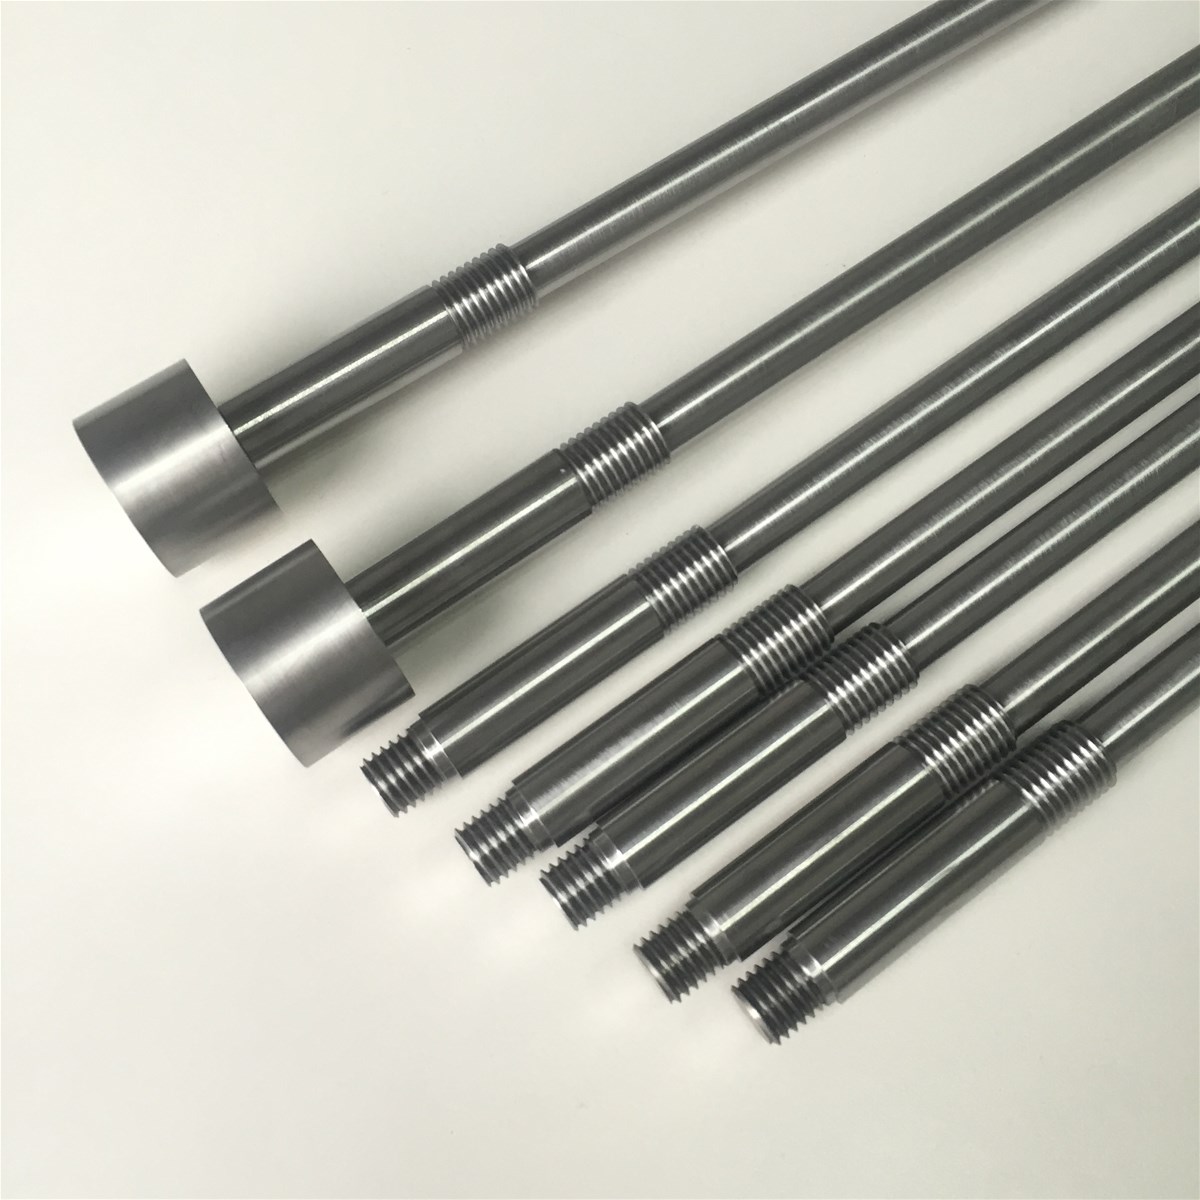 pure molybdenum electrode rod moly rod for glass melting